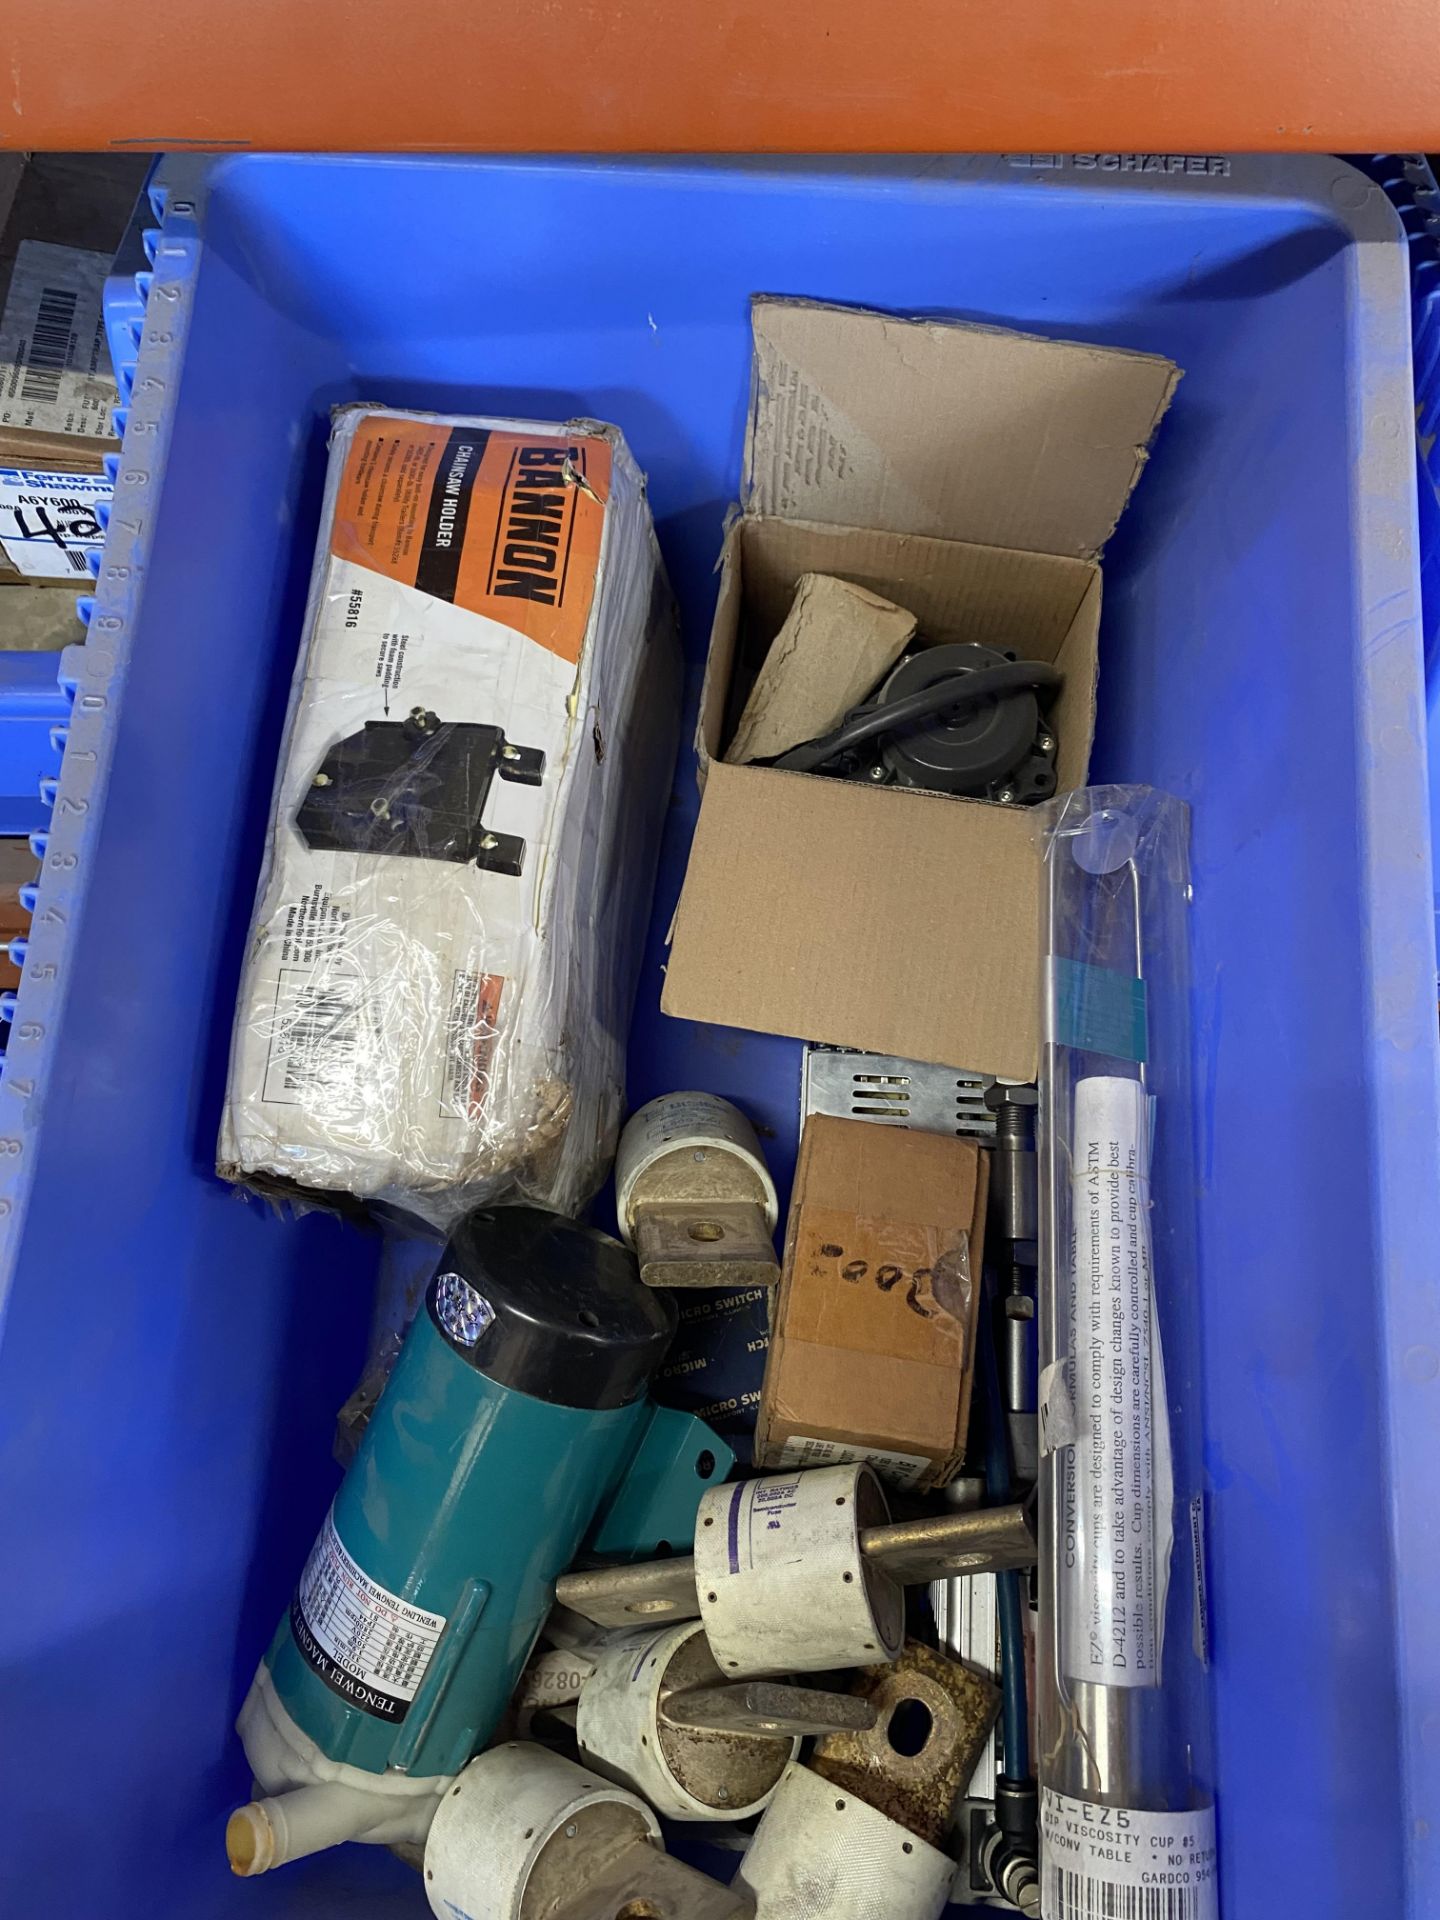 Contents of Bin, 24"x16"x12" - Includes Blue Bin - Image 2 of 5